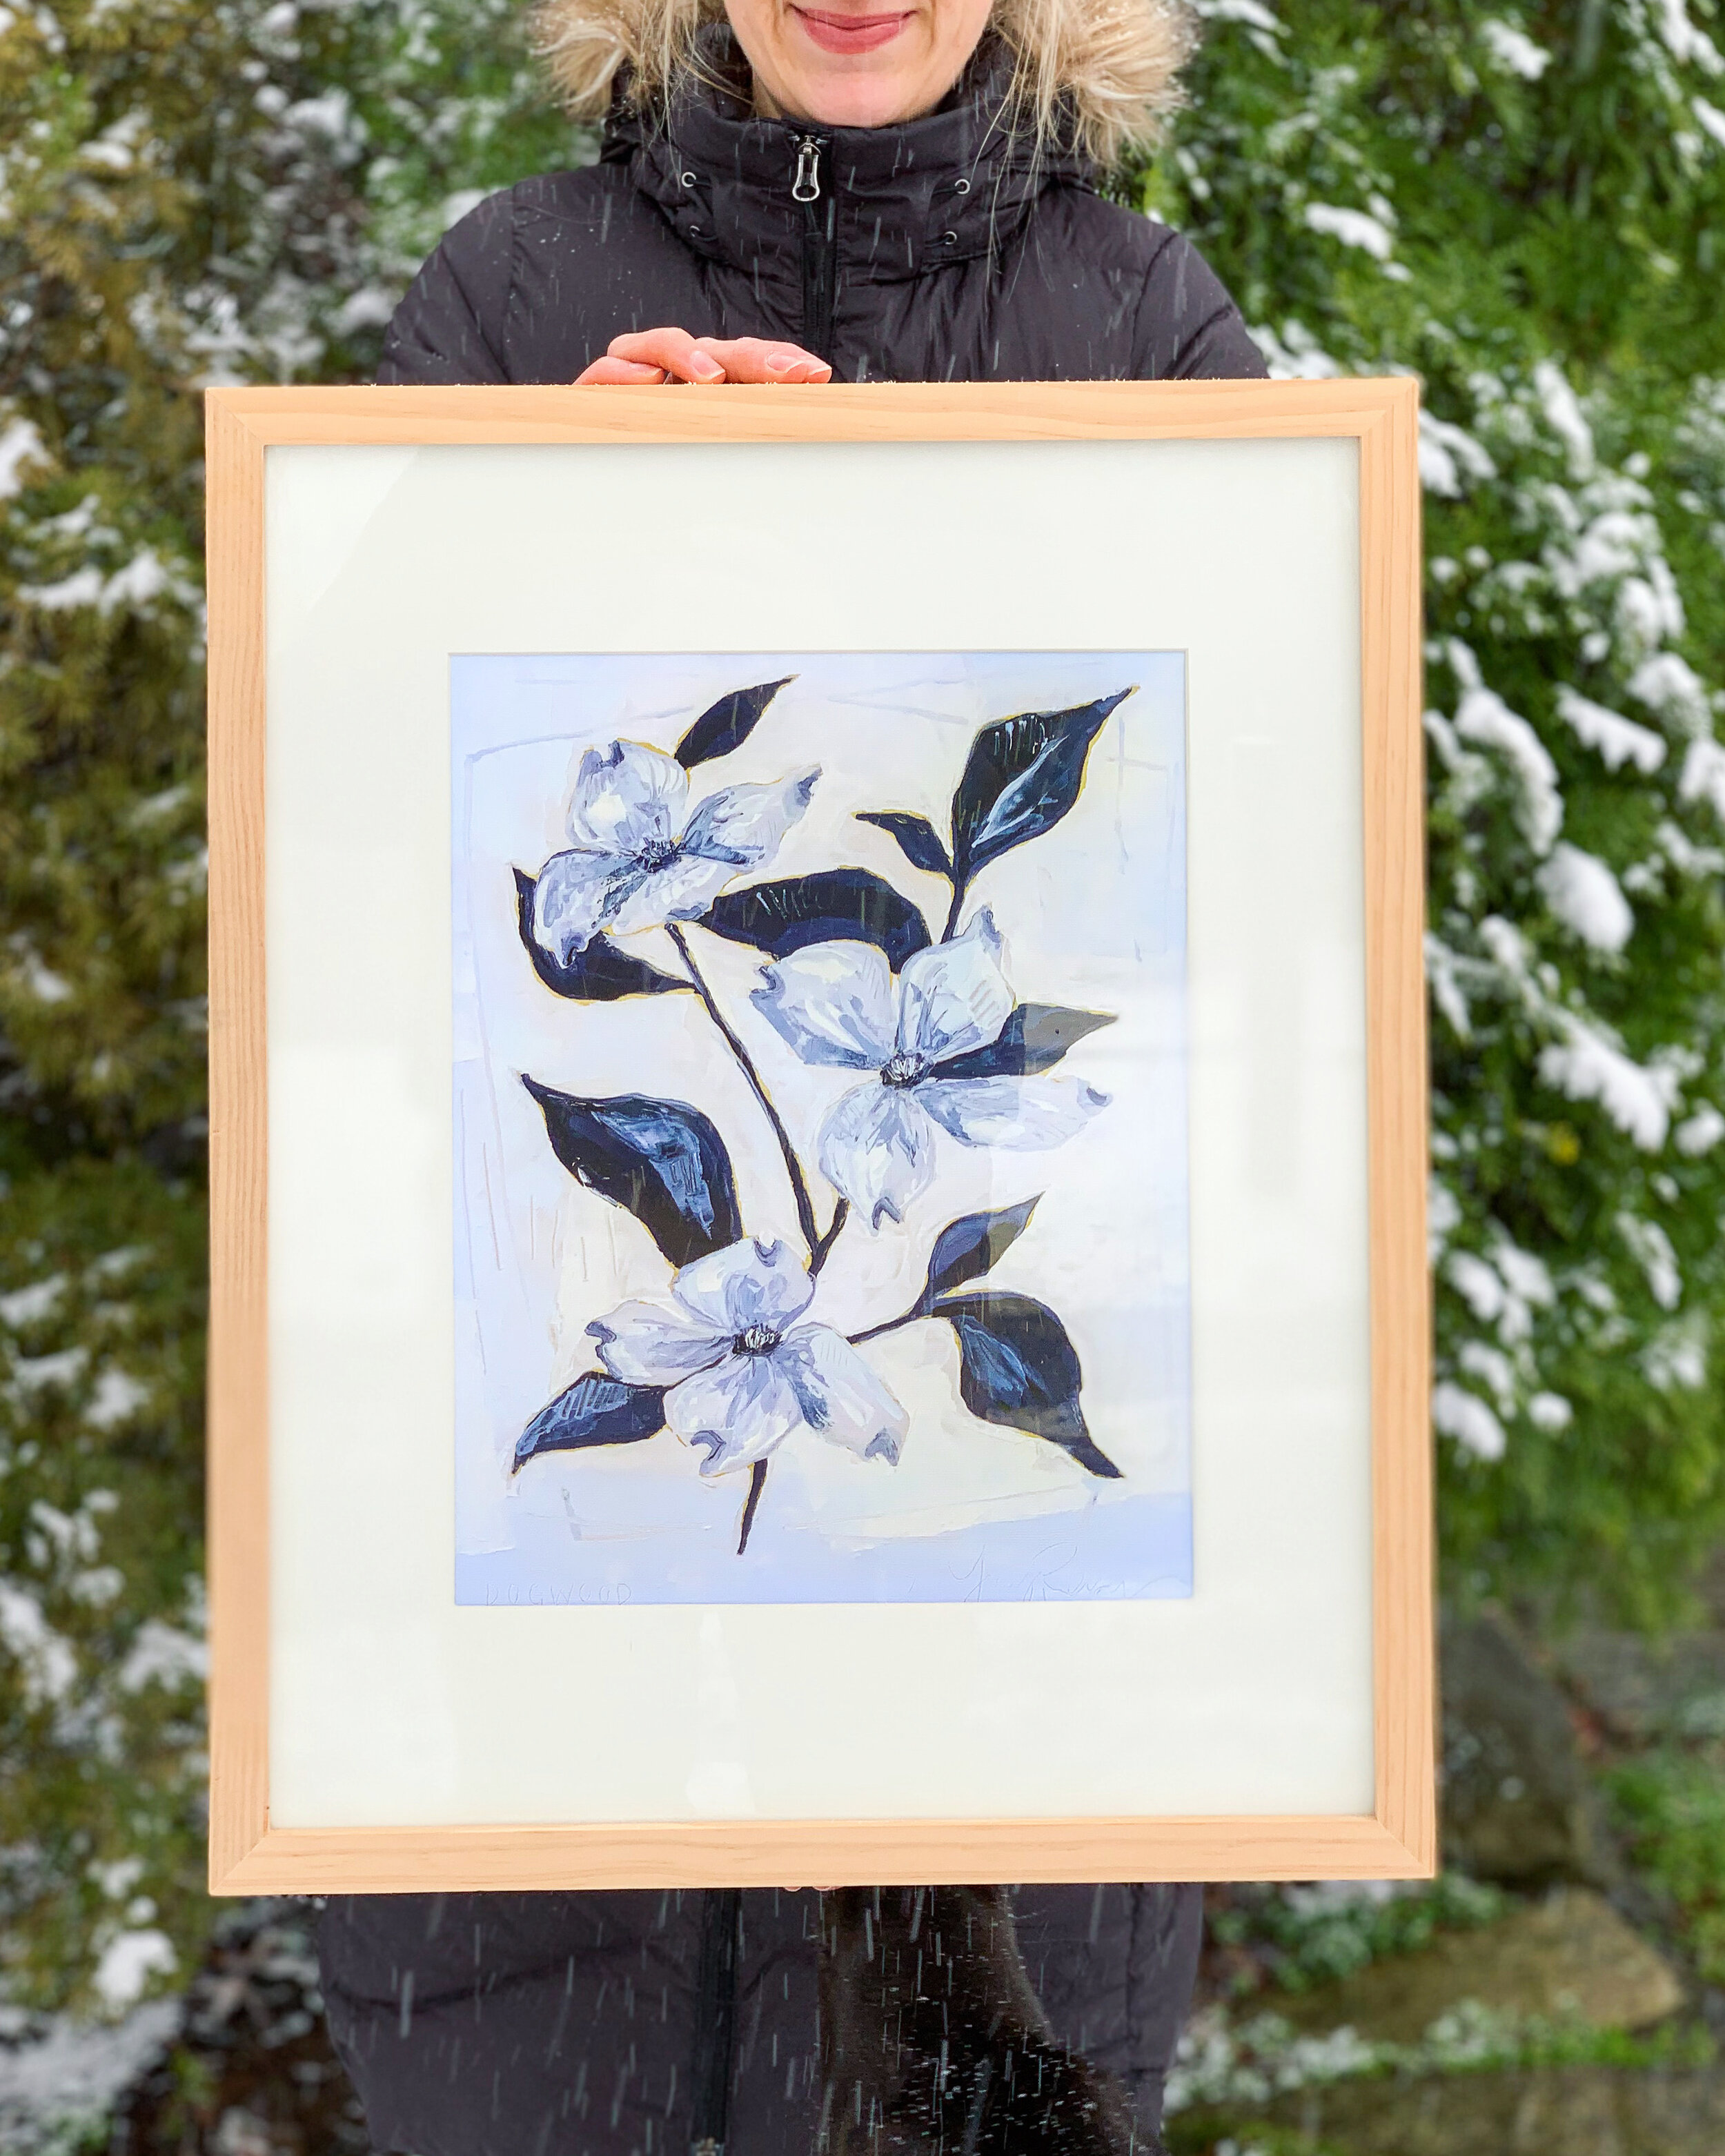 Spent a snow day making new Blue Botanical prints